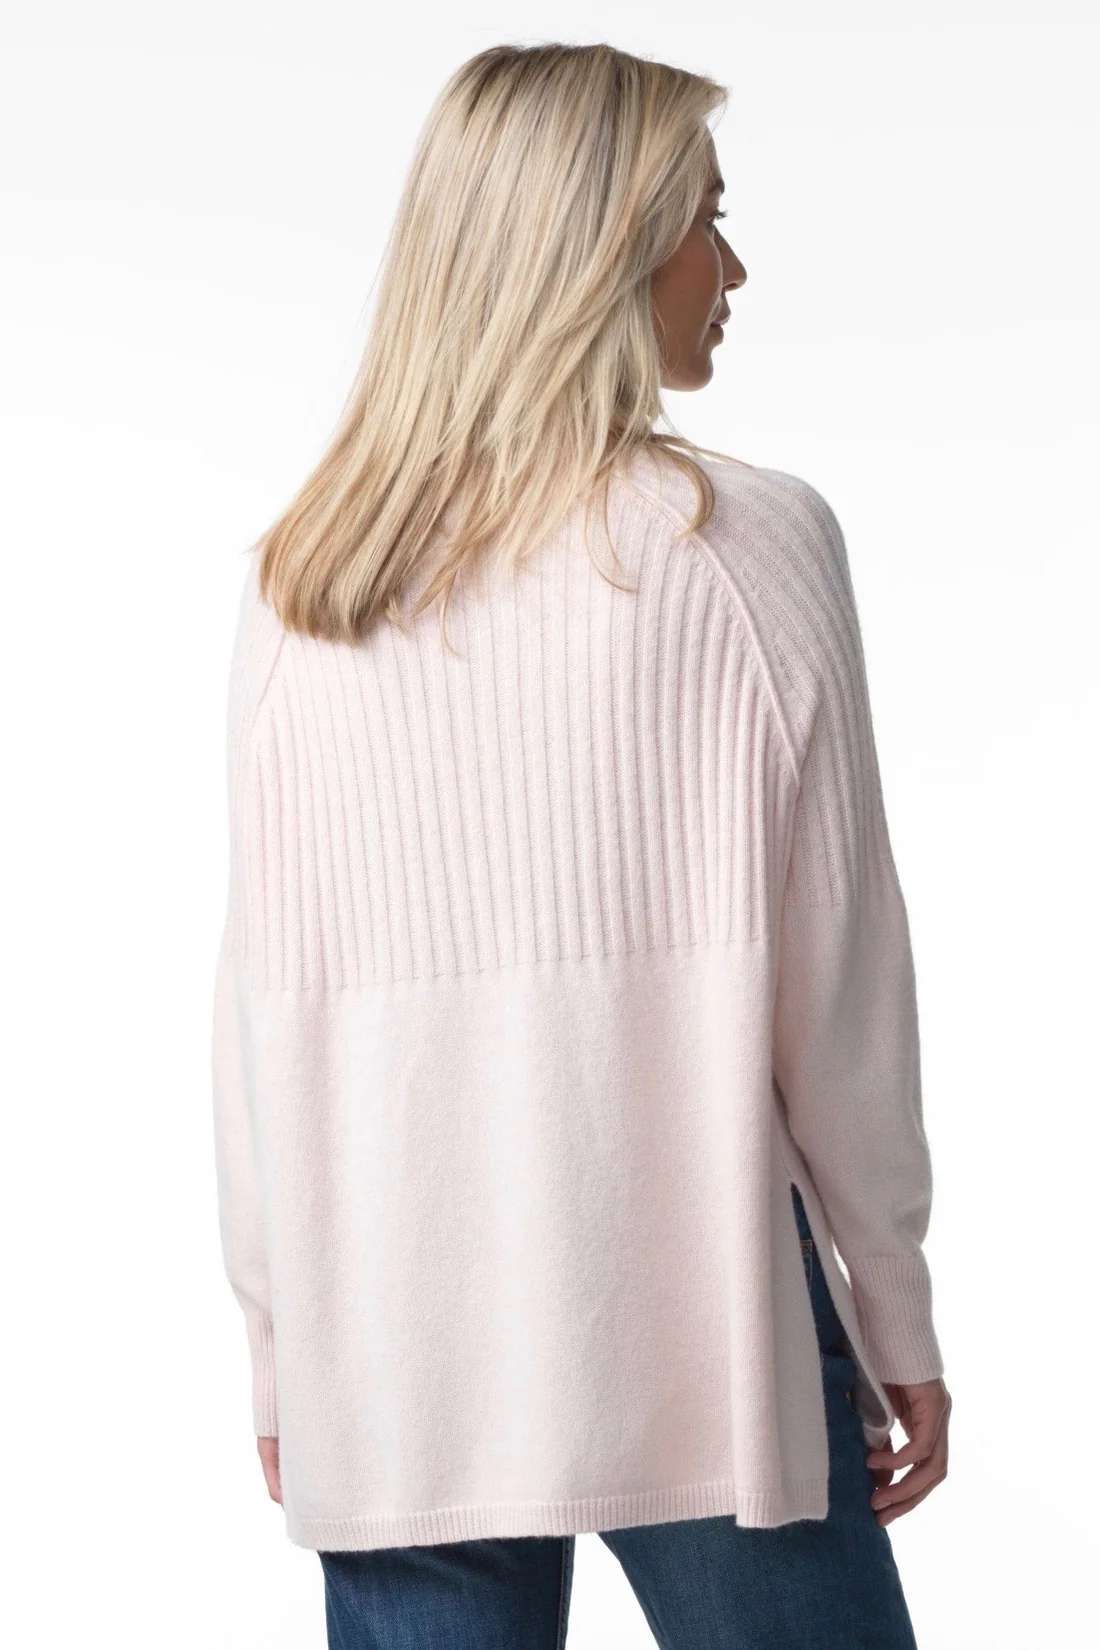 Zaket & Plover Zaket & Plover - Rib Detail Sweater - Champagne available at The Good Life Boutique